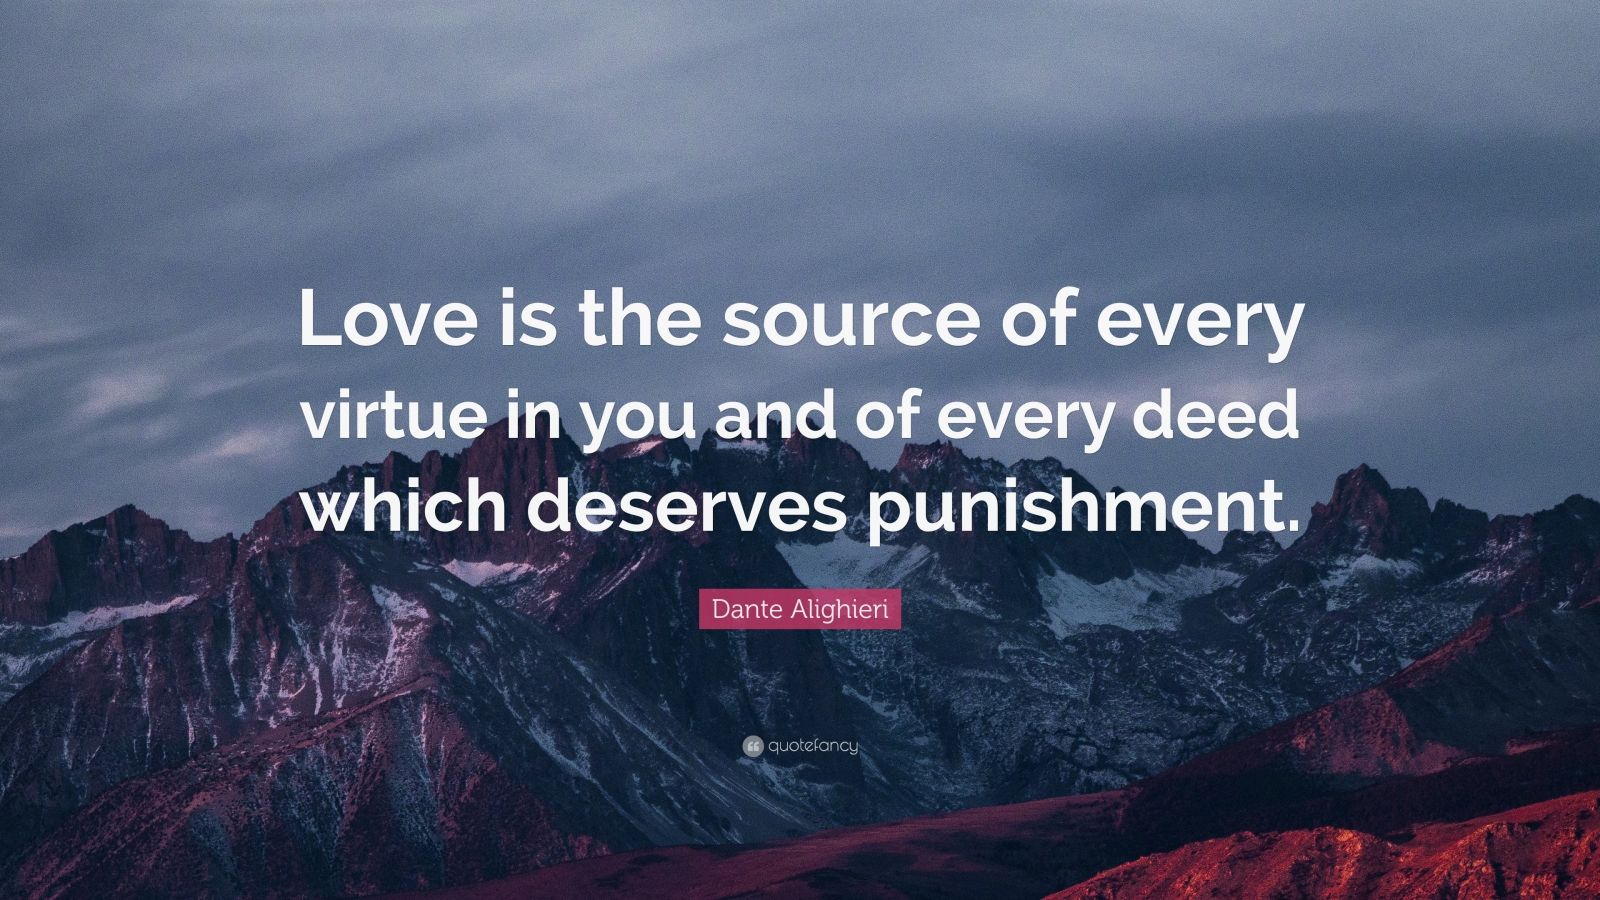 Dante Alighieri Quote: “Love is the source of every virtue in you and ...